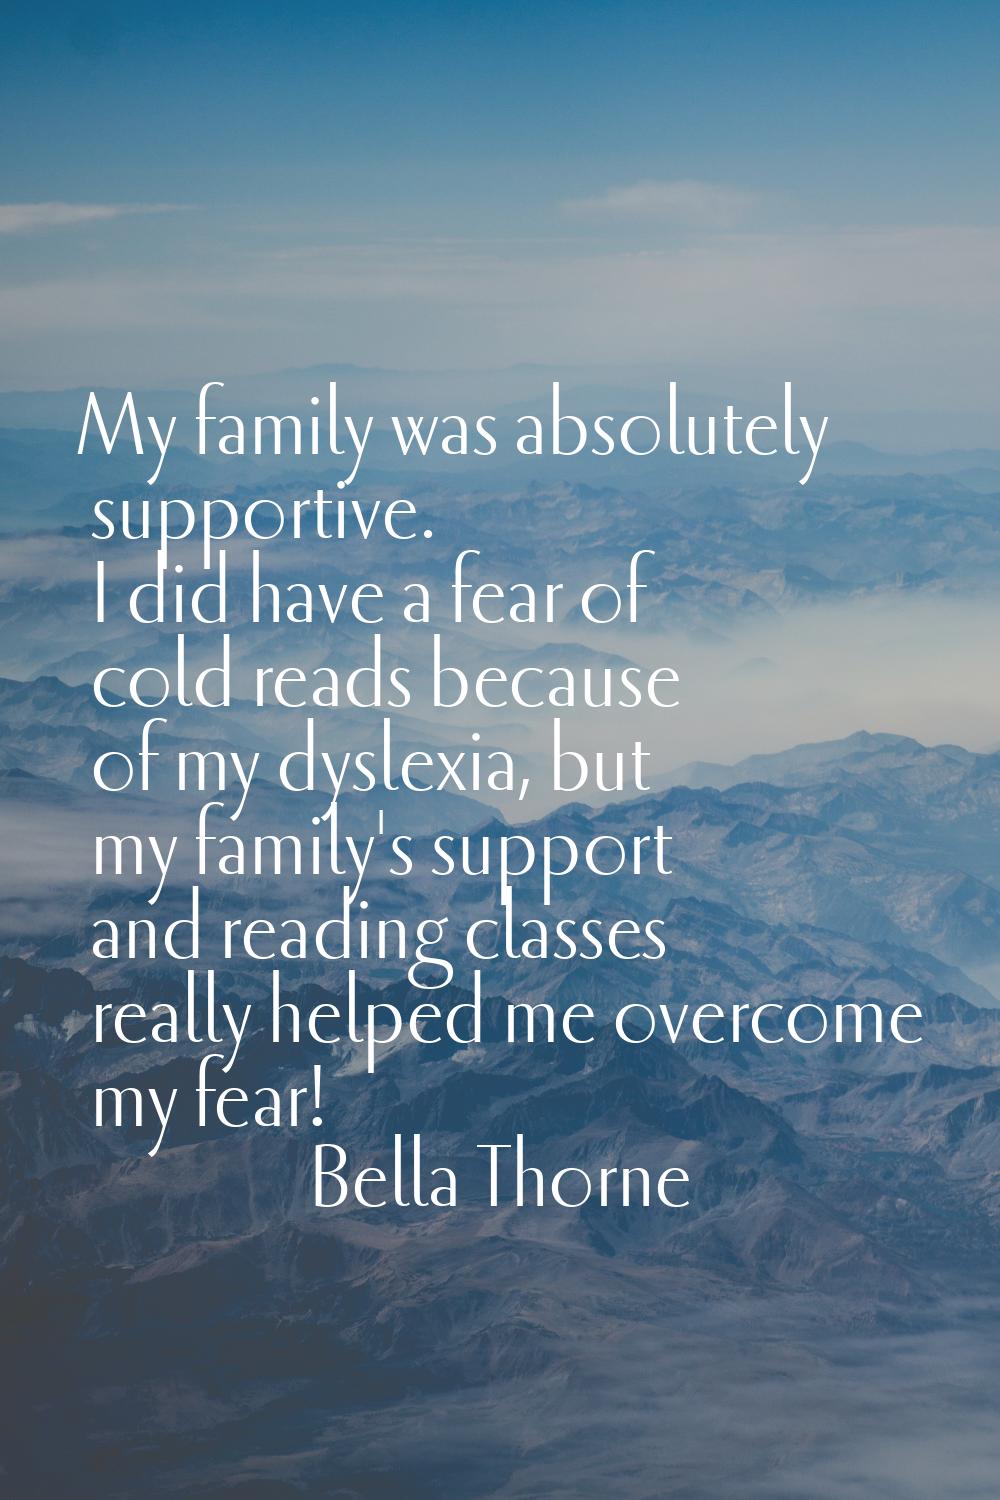 My family was absolutely supportive. I did have a fear of cold reads because of my dyslexia, but my